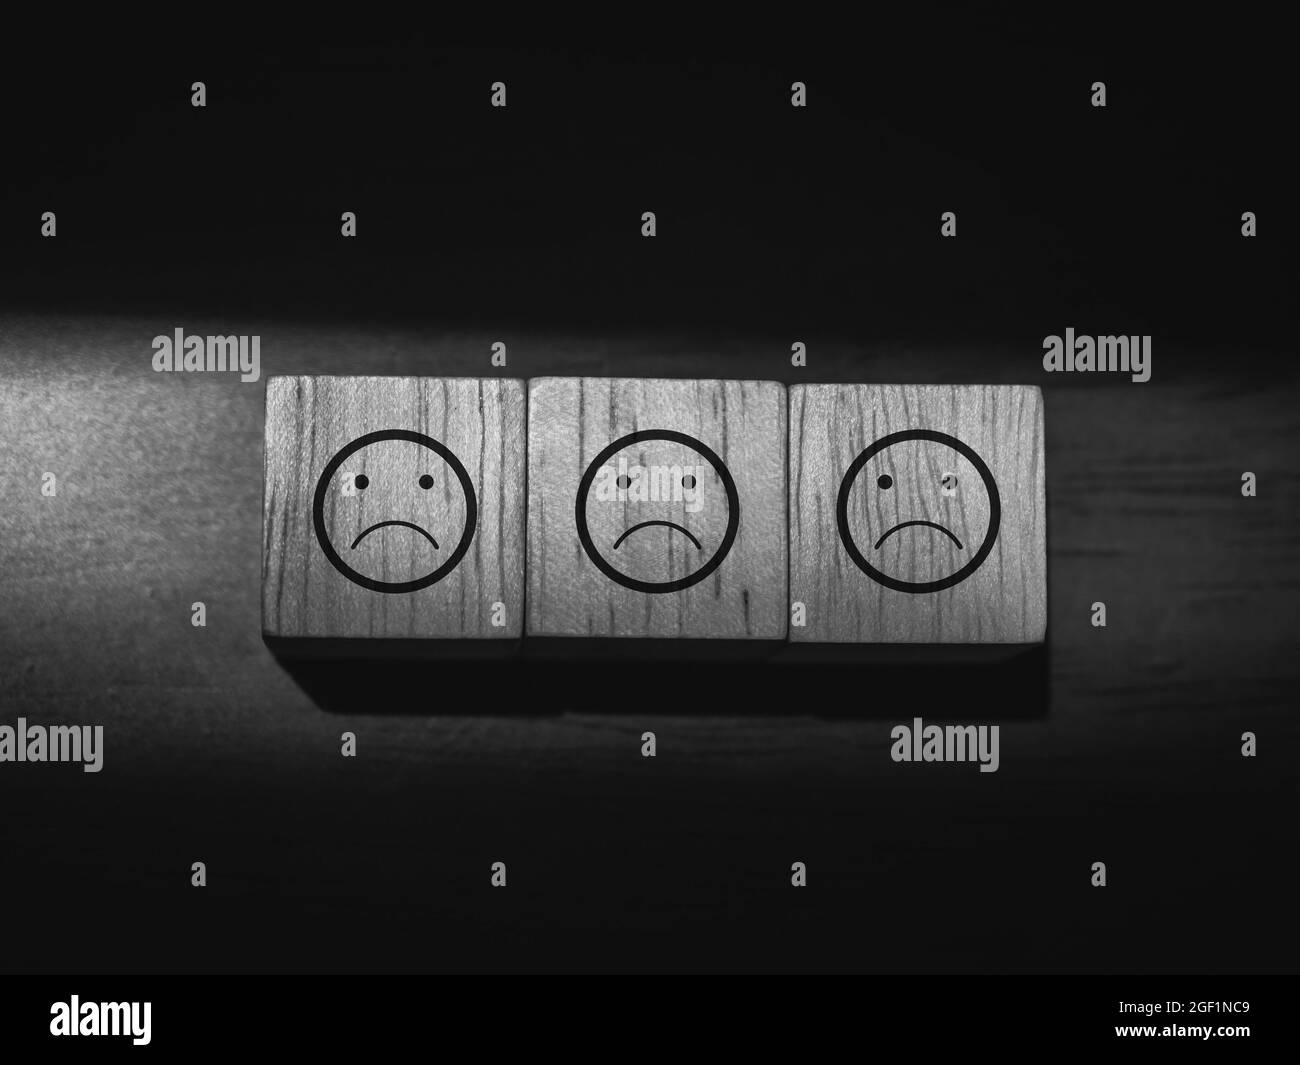 Sad, boring face emoticon on wooden cube blocks on dark background, black and white style. Not satisfied, feedback review, satisfaction service concep Stock Photo